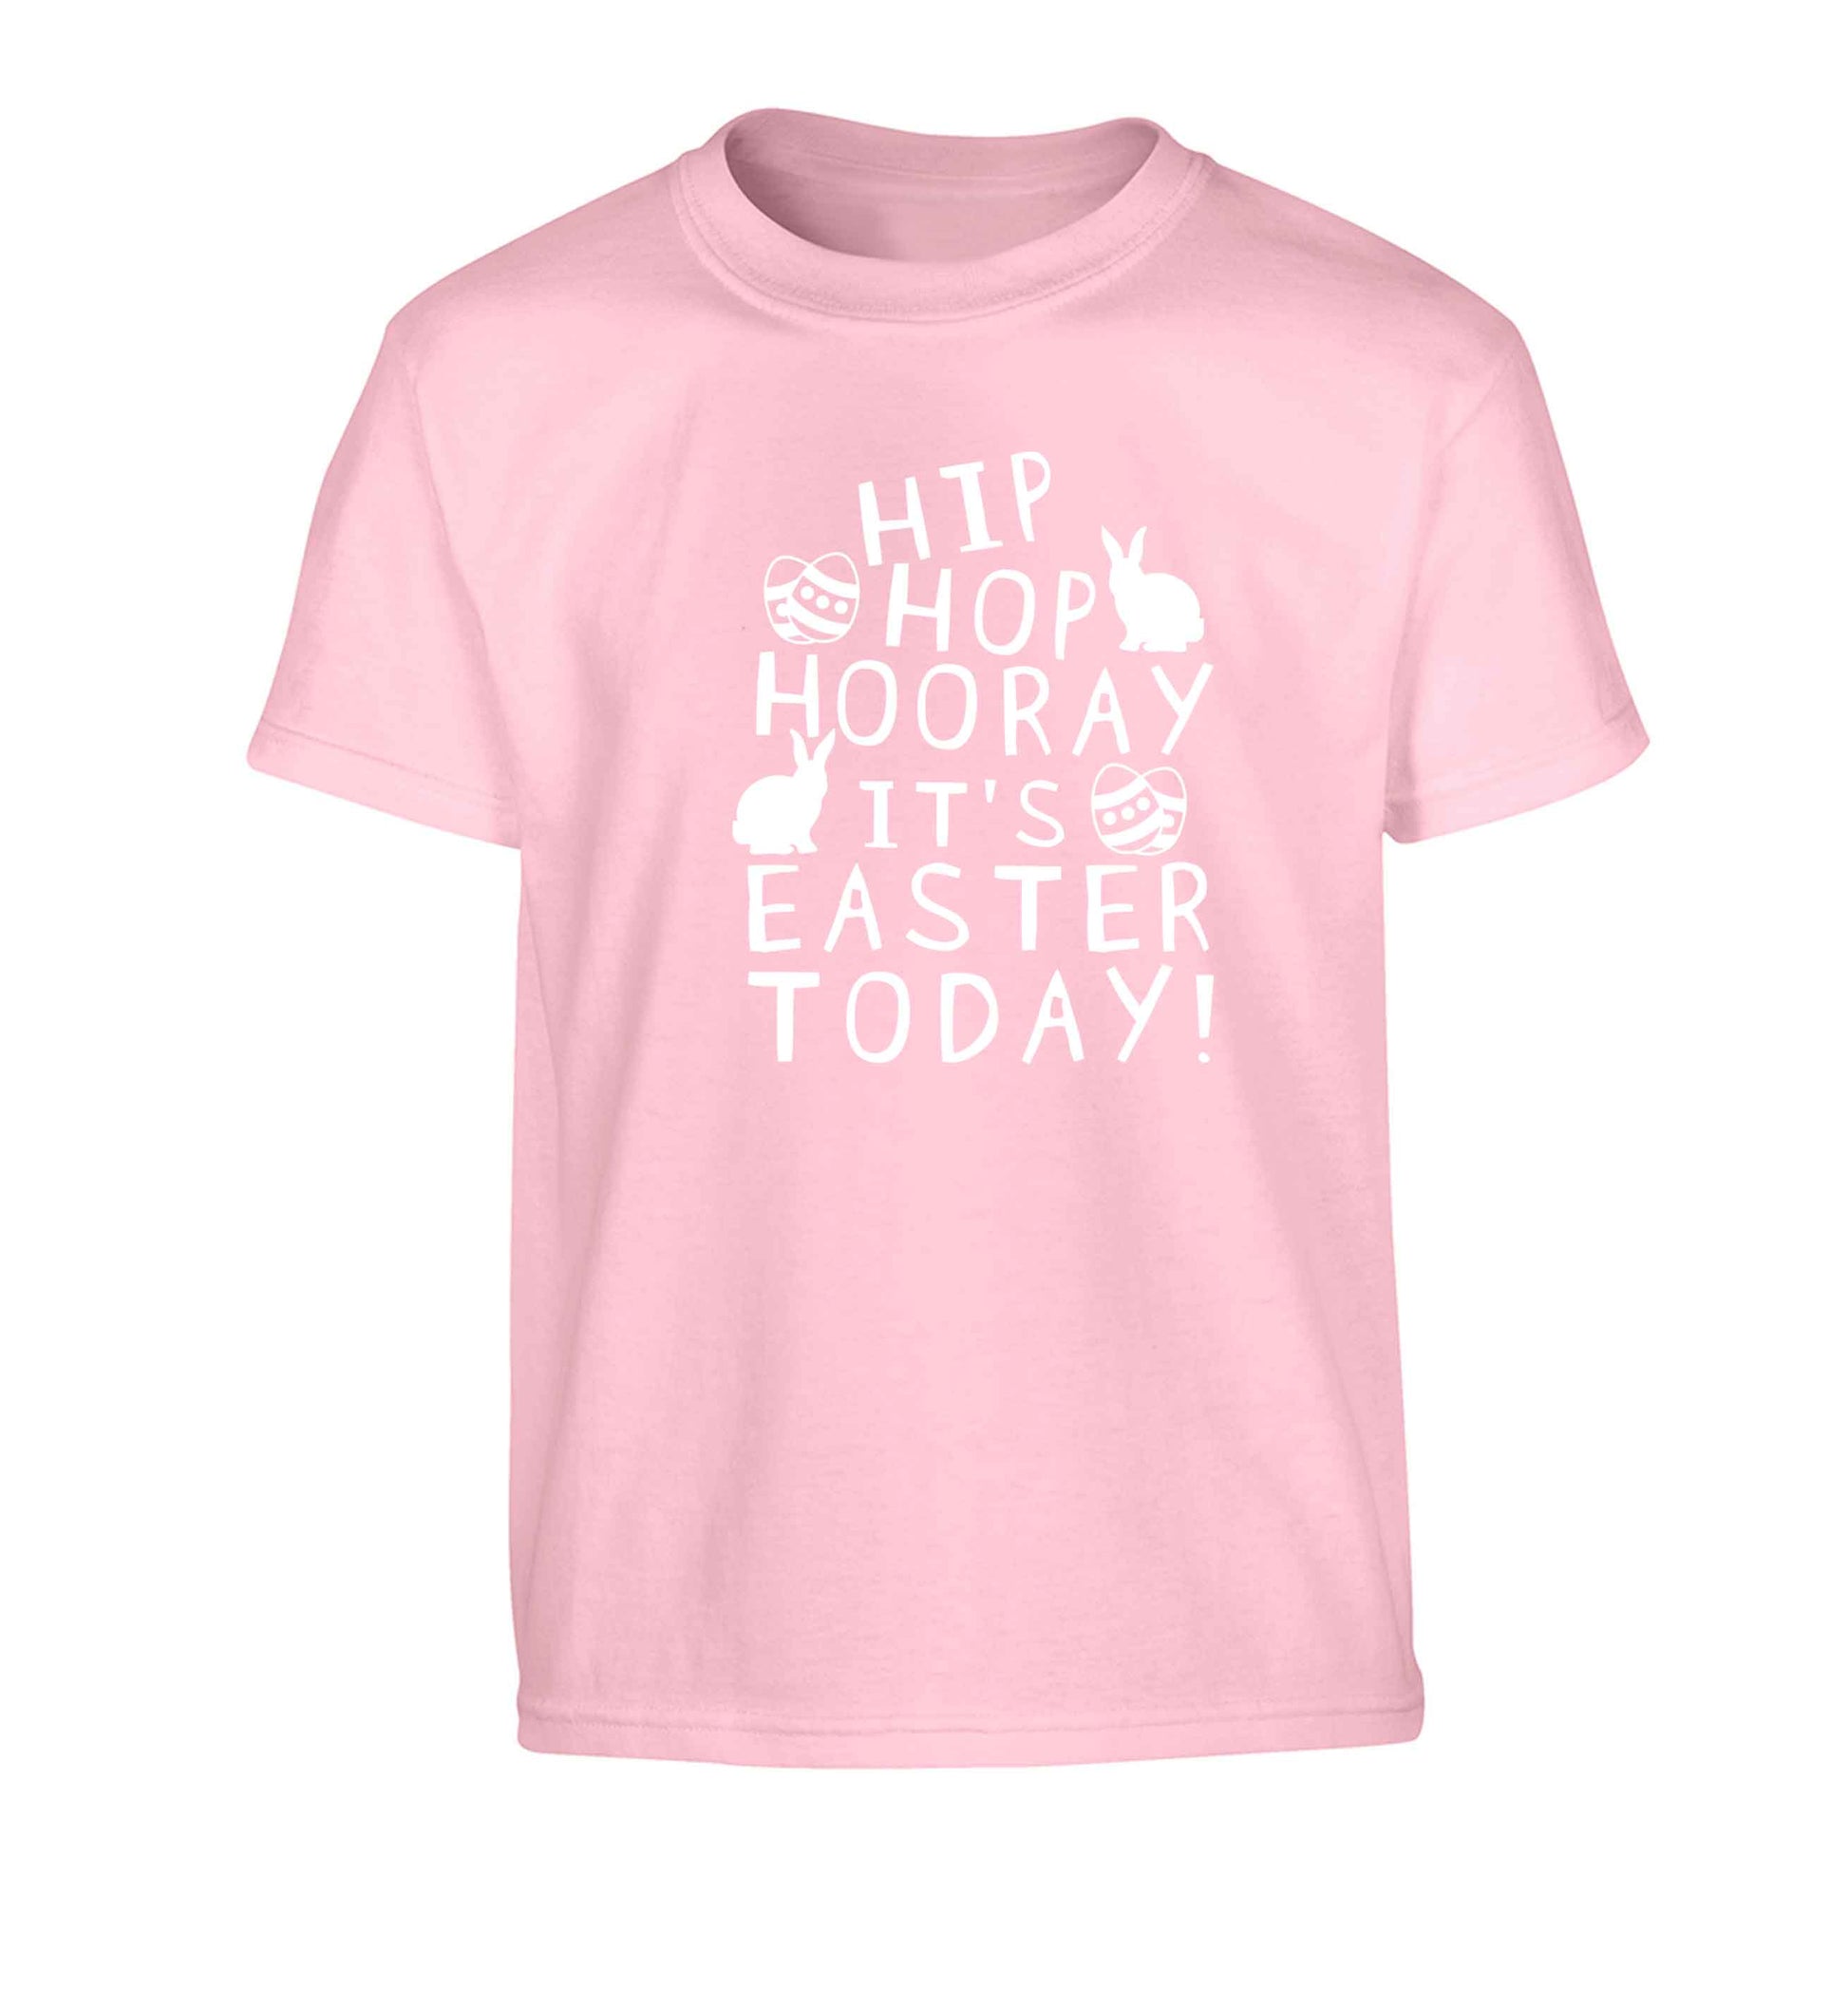 Hip hip hooray it's Easter today! Children's light pink Tshirt 12-13 Years